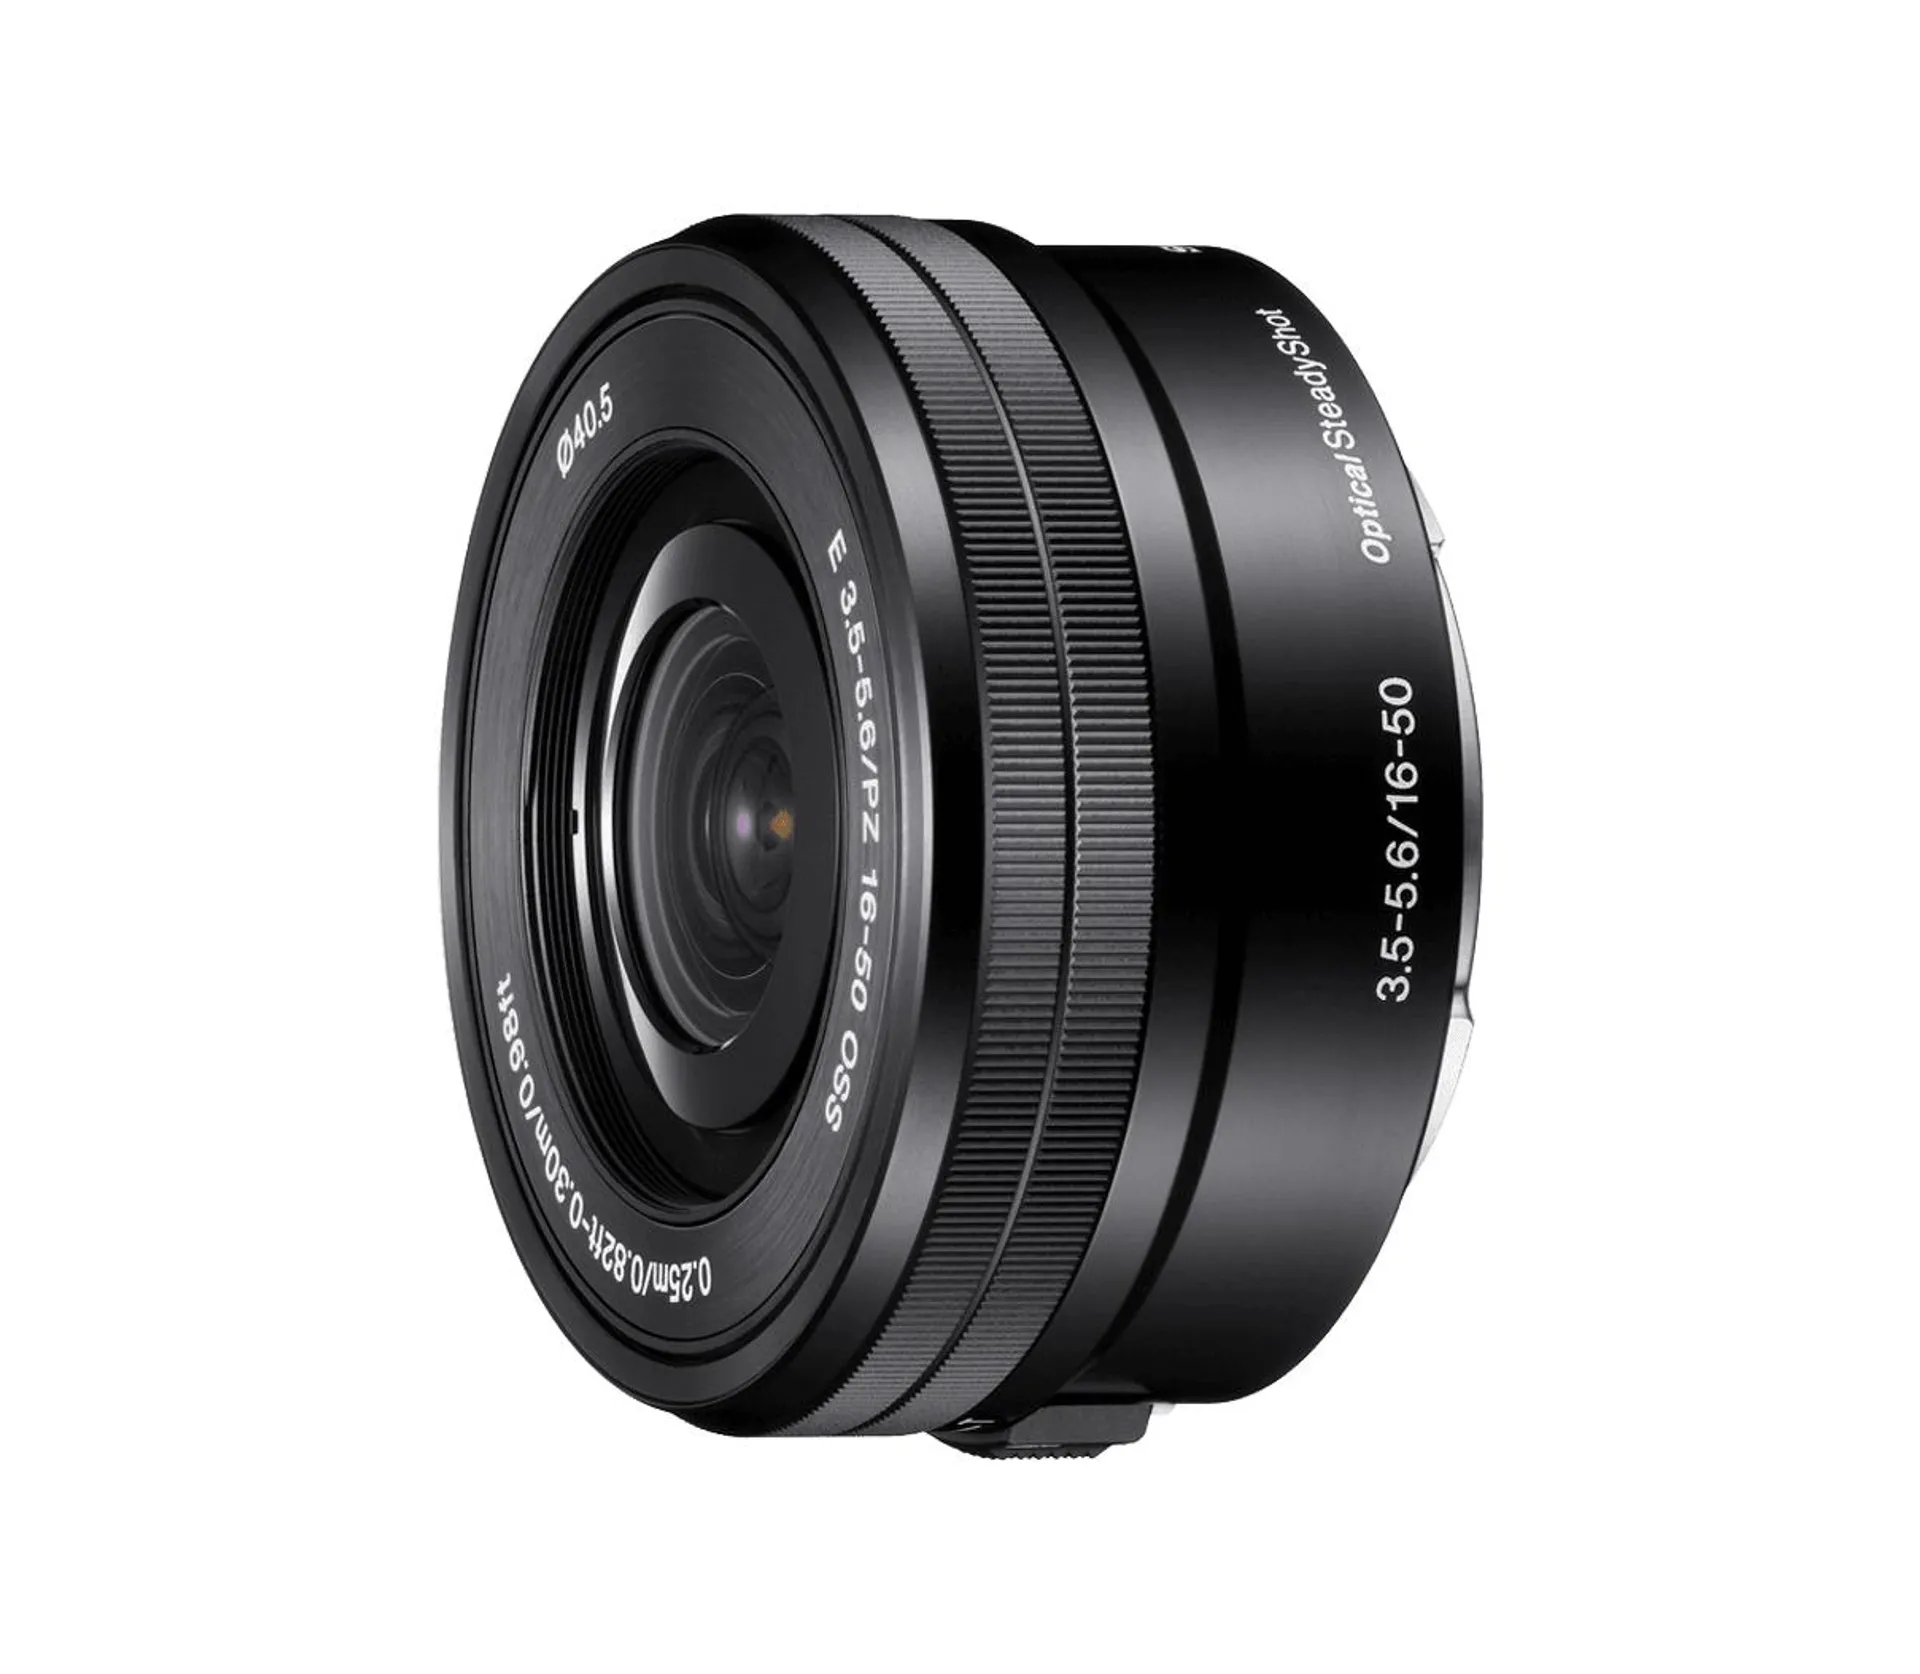 E PZ 16–50 mm F3.5–5.6 OSS APS-C Wide-angle Power Zoom Lens with Optical SteadyShot